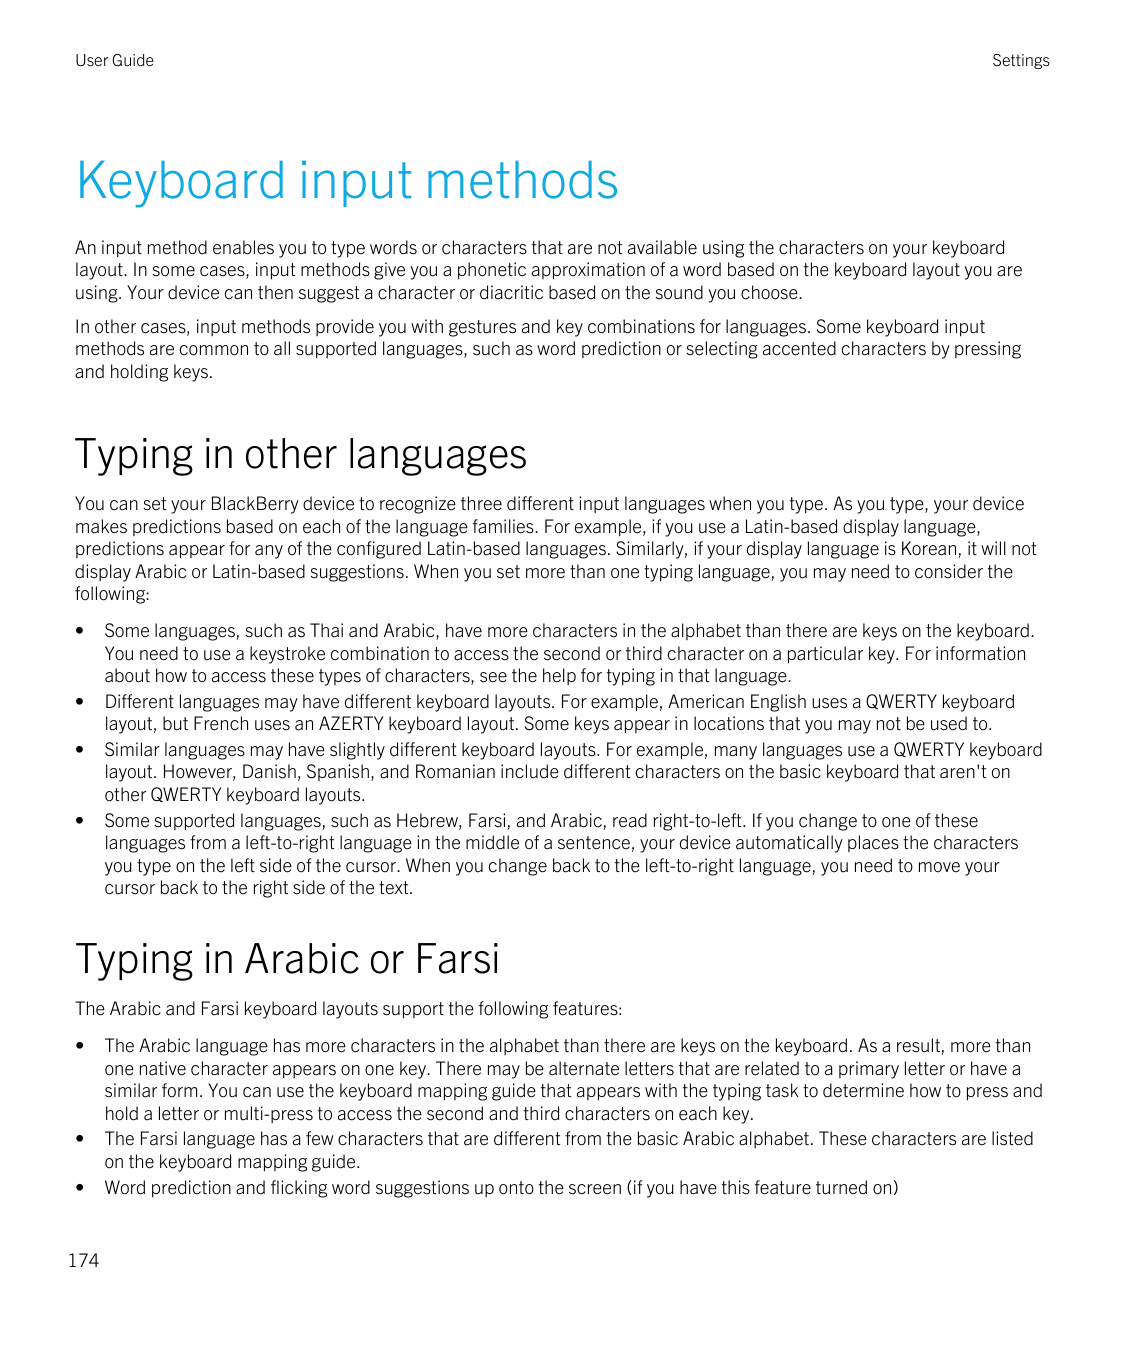 User GuideSettingsKeyboard input methodsAn input method enables you to type words or characters that are not available using the